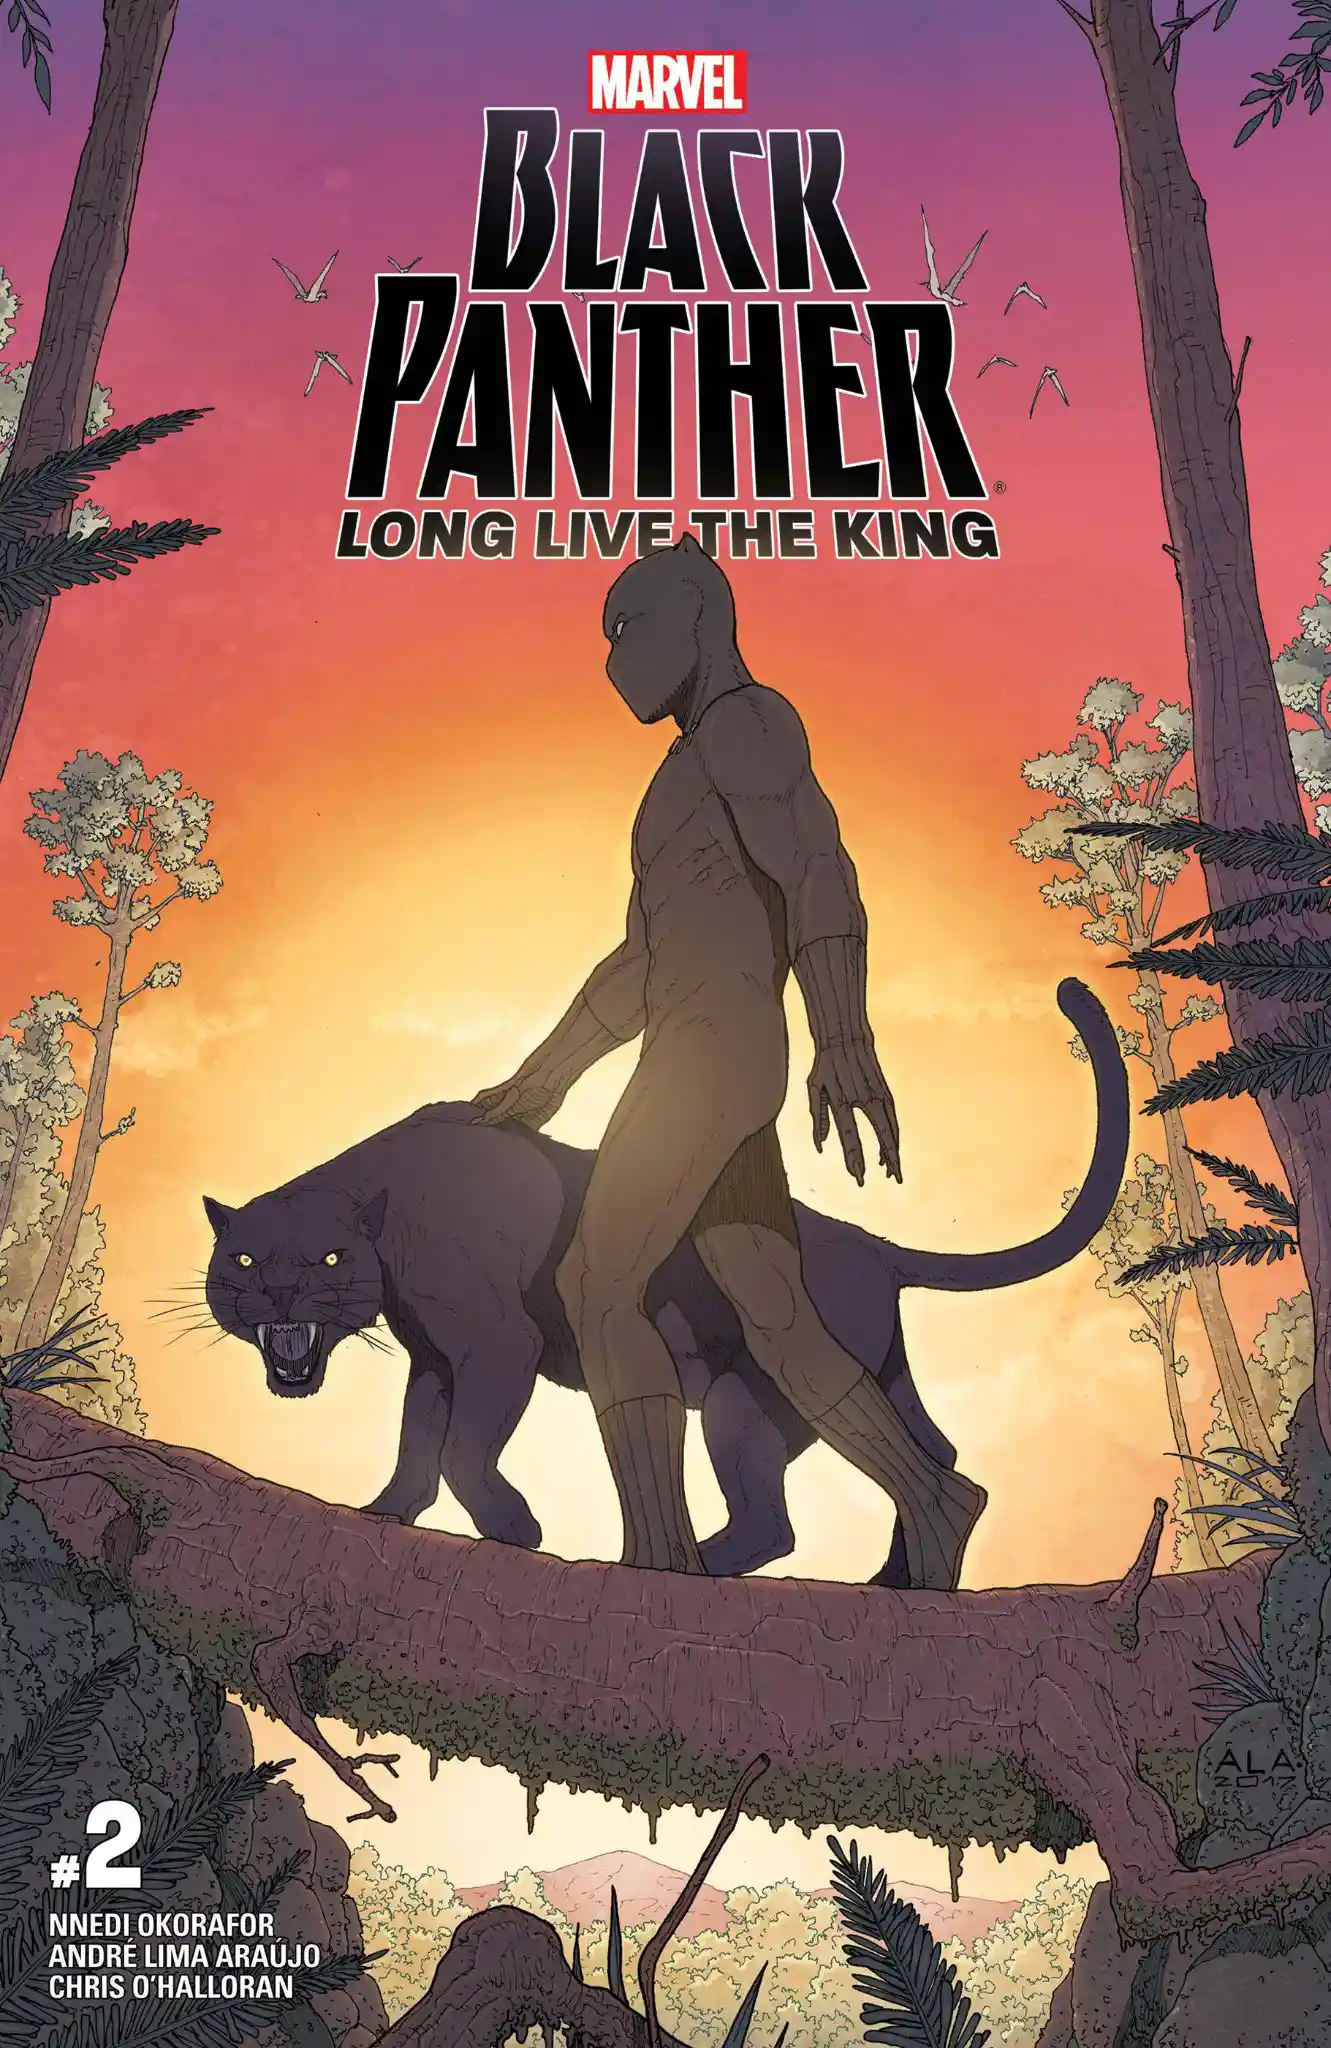 『BLACK PANTHER： LONG LIVE THE KING』＃2（2017 - 2018年発行）